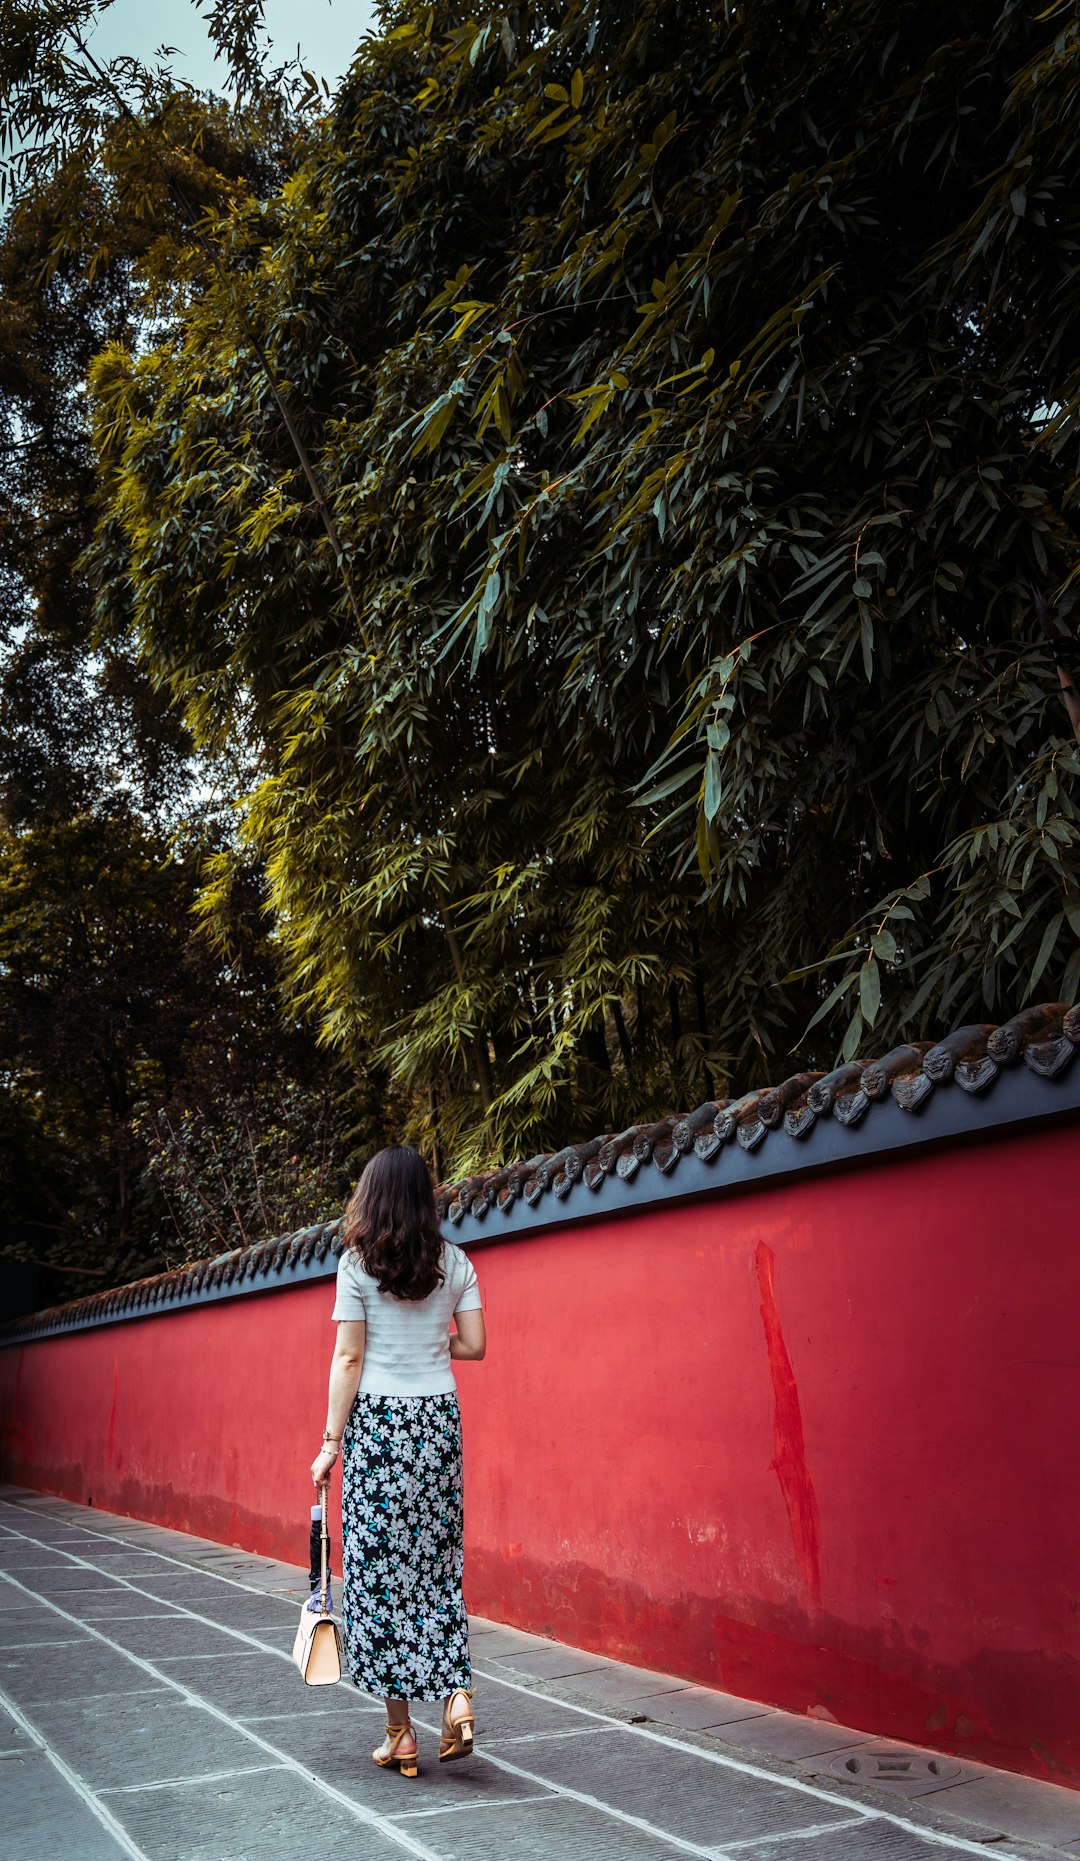 woman in white shirt standing on red roof